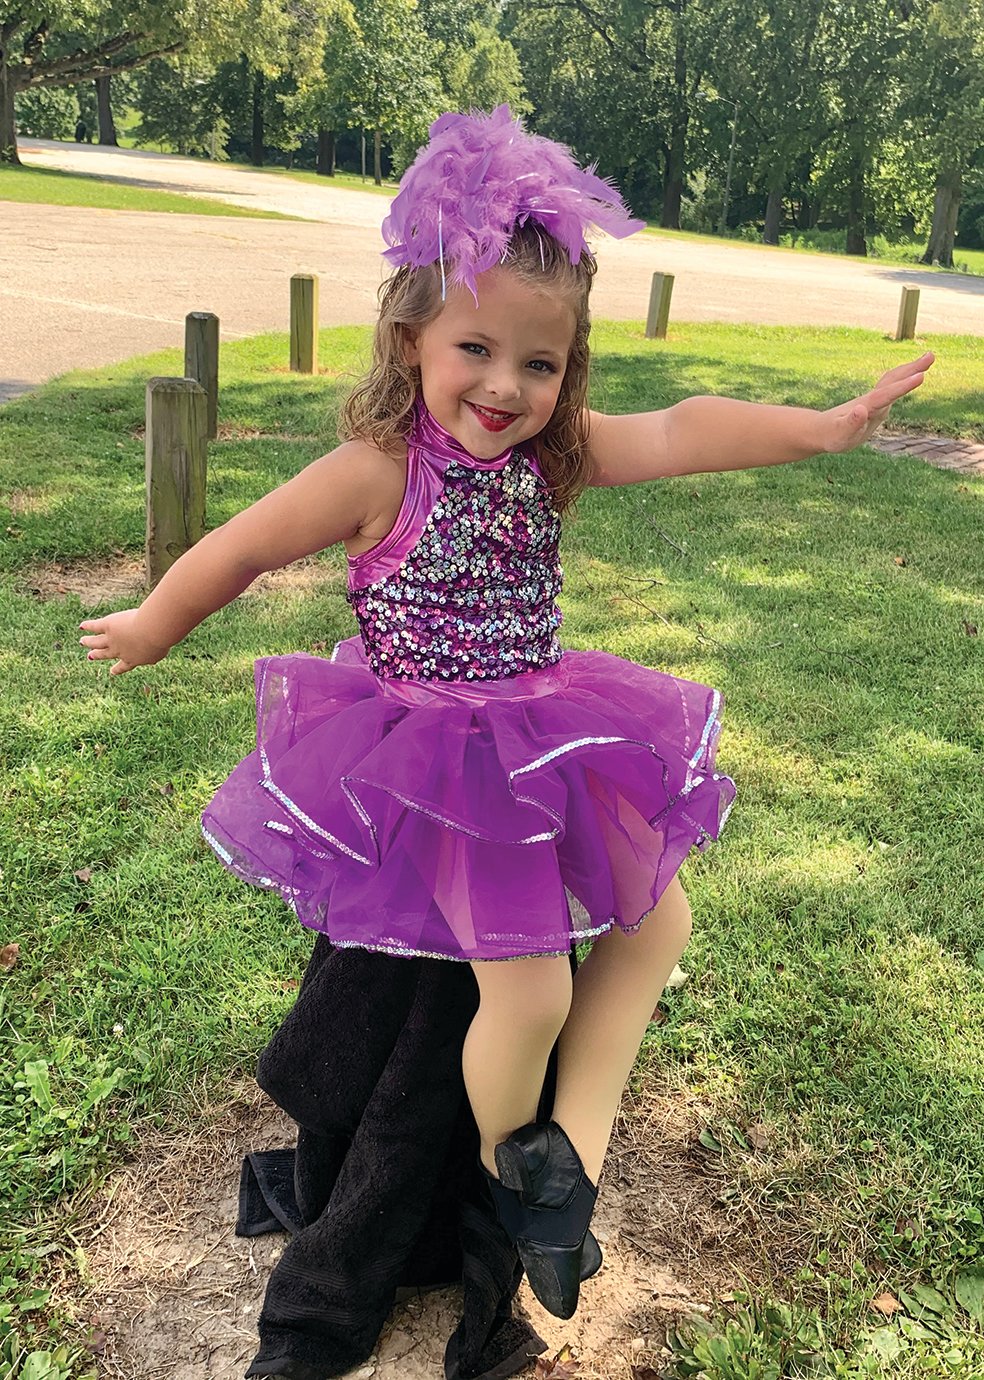 Charlie Cosby, 4, poses for a photo before a dance recital at Milligan Park on Sunday, Aug. 16. A video posted to social media giant TikTok has been viewed nearly 5 million times online.